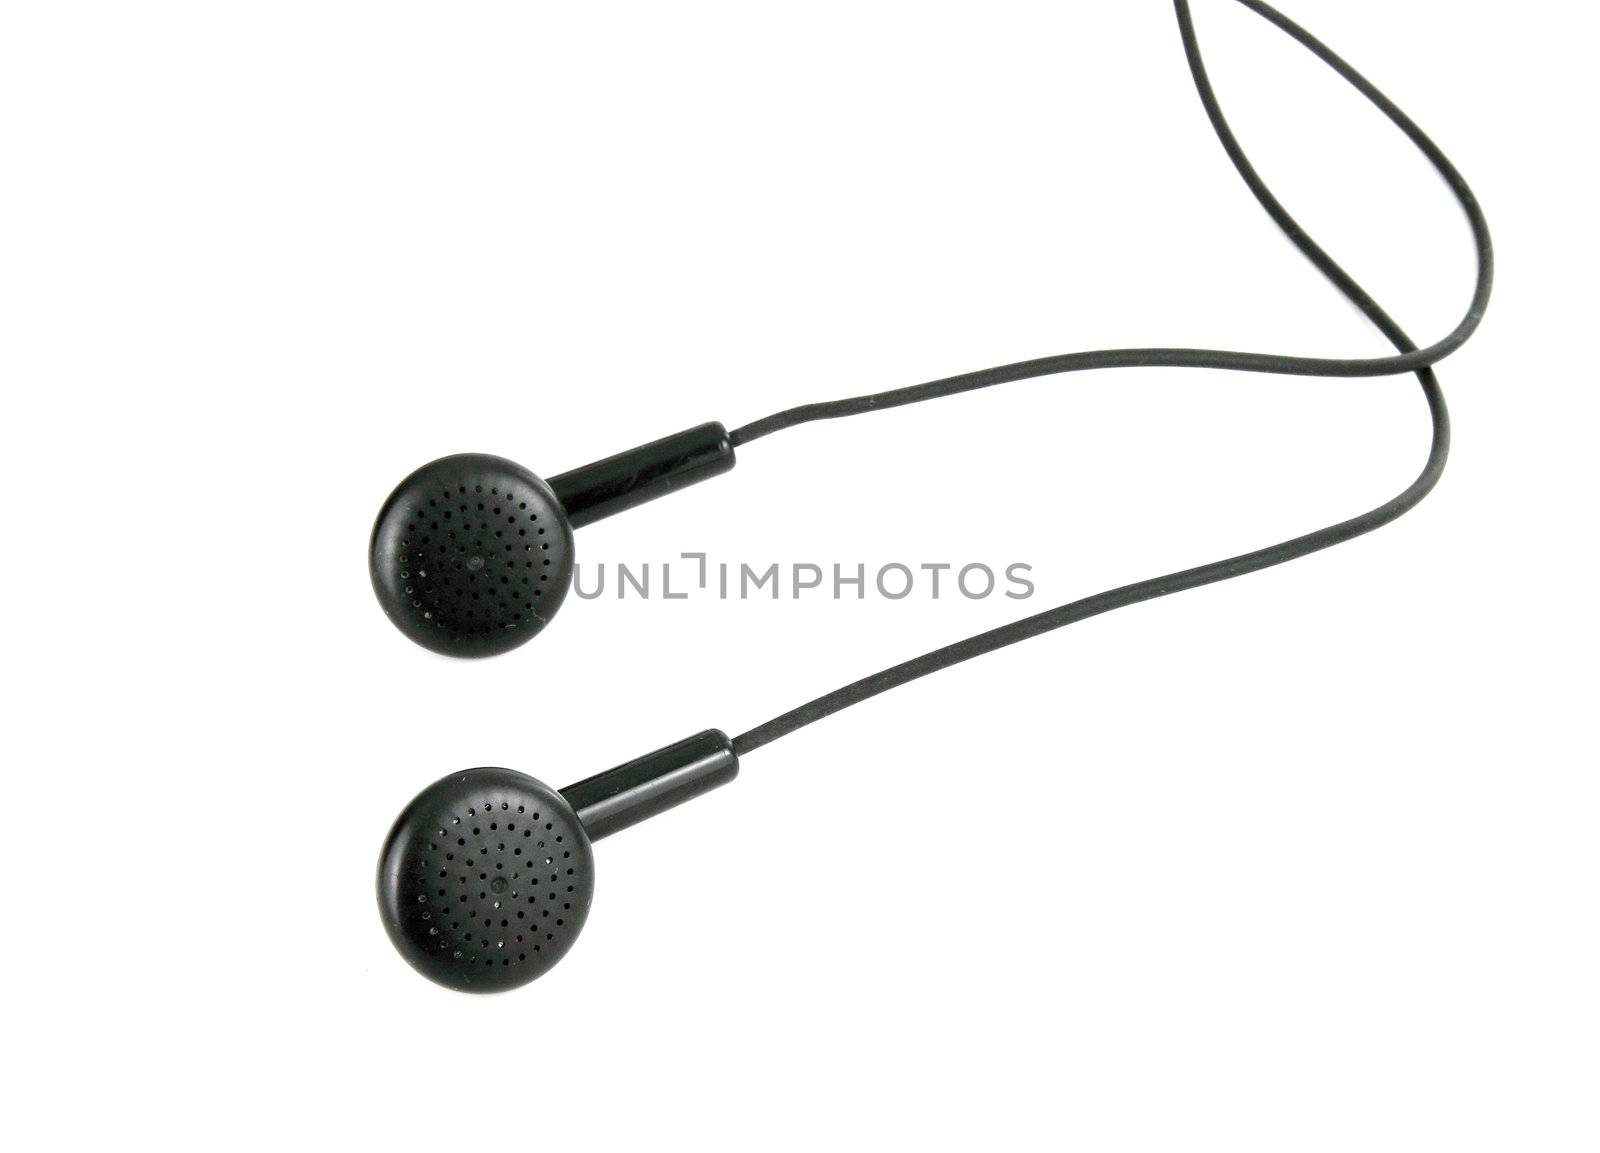 Modern portable audio earphones, isolated on a white background